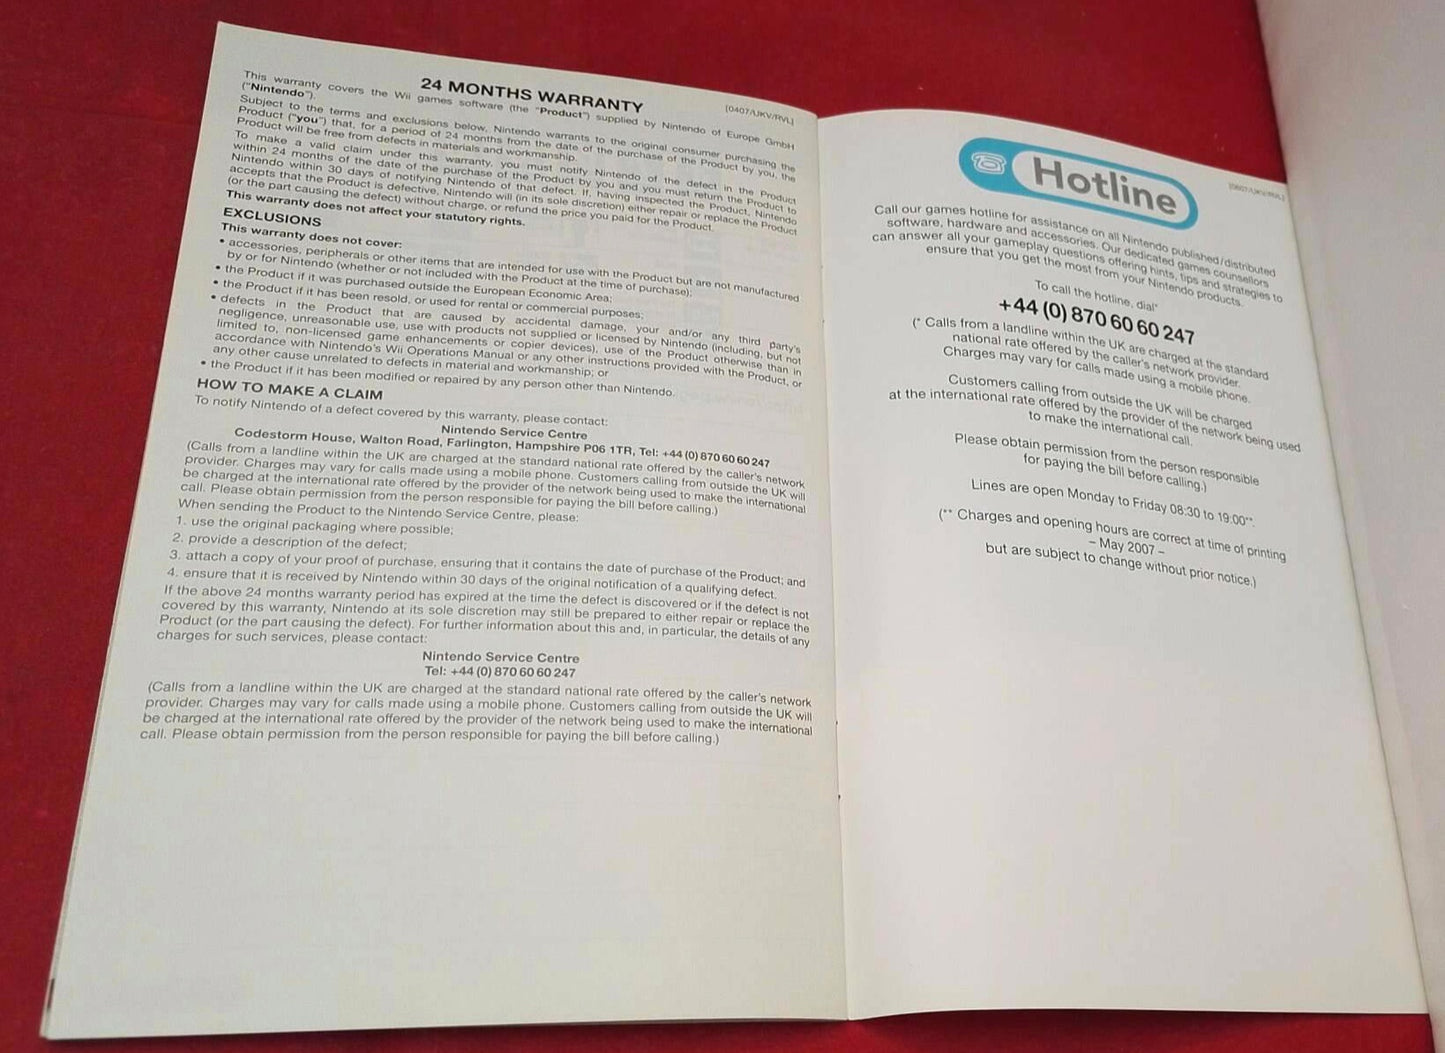 Mario Kart Nintendo Wii Spare Manual Only